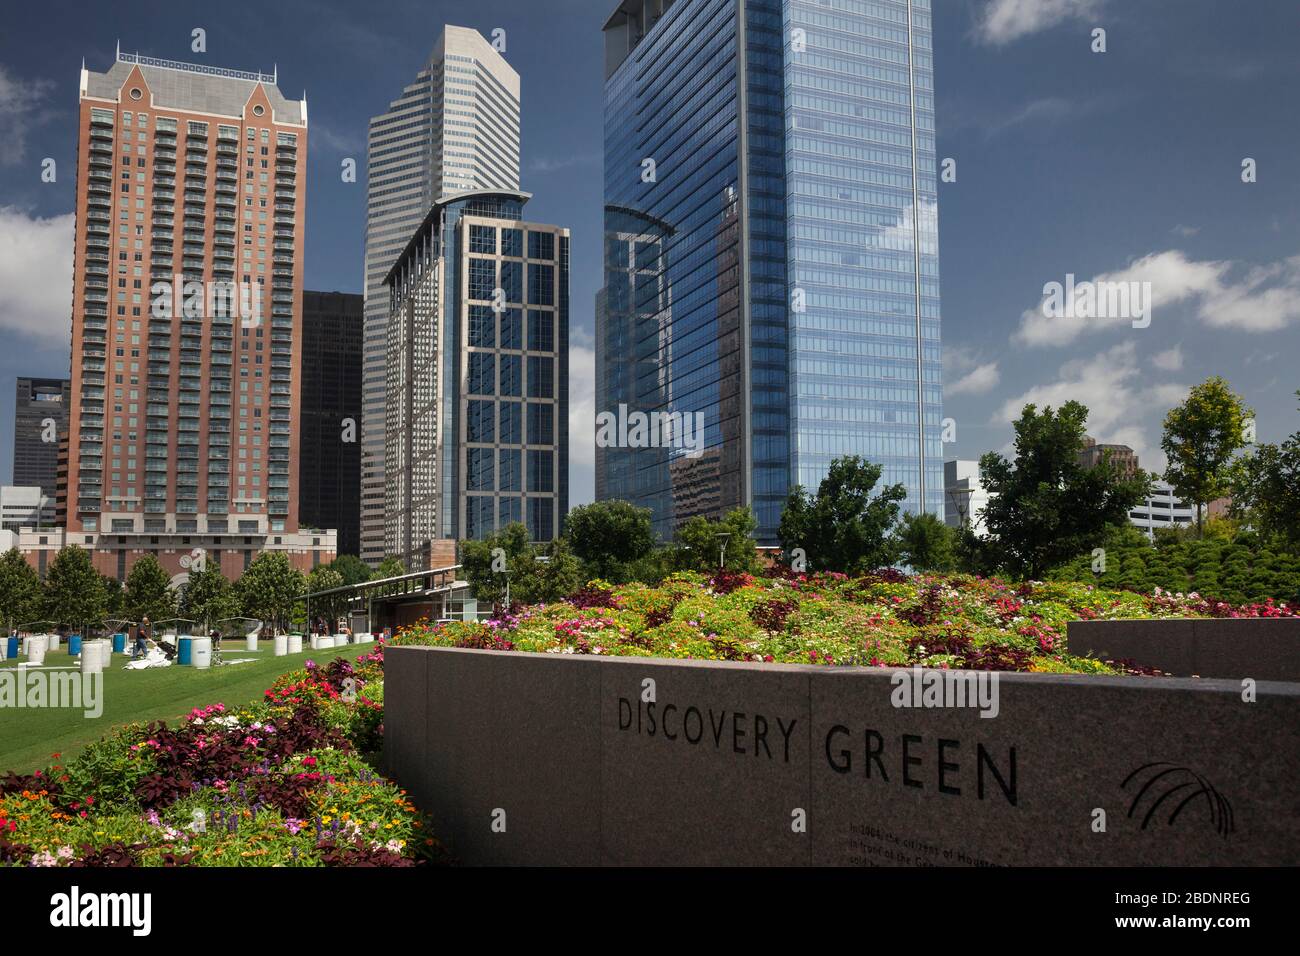 Horizontal view of some of the Downtown skyscrapers from the Discovery Green public urban park, Houston, Texas Stock Photo